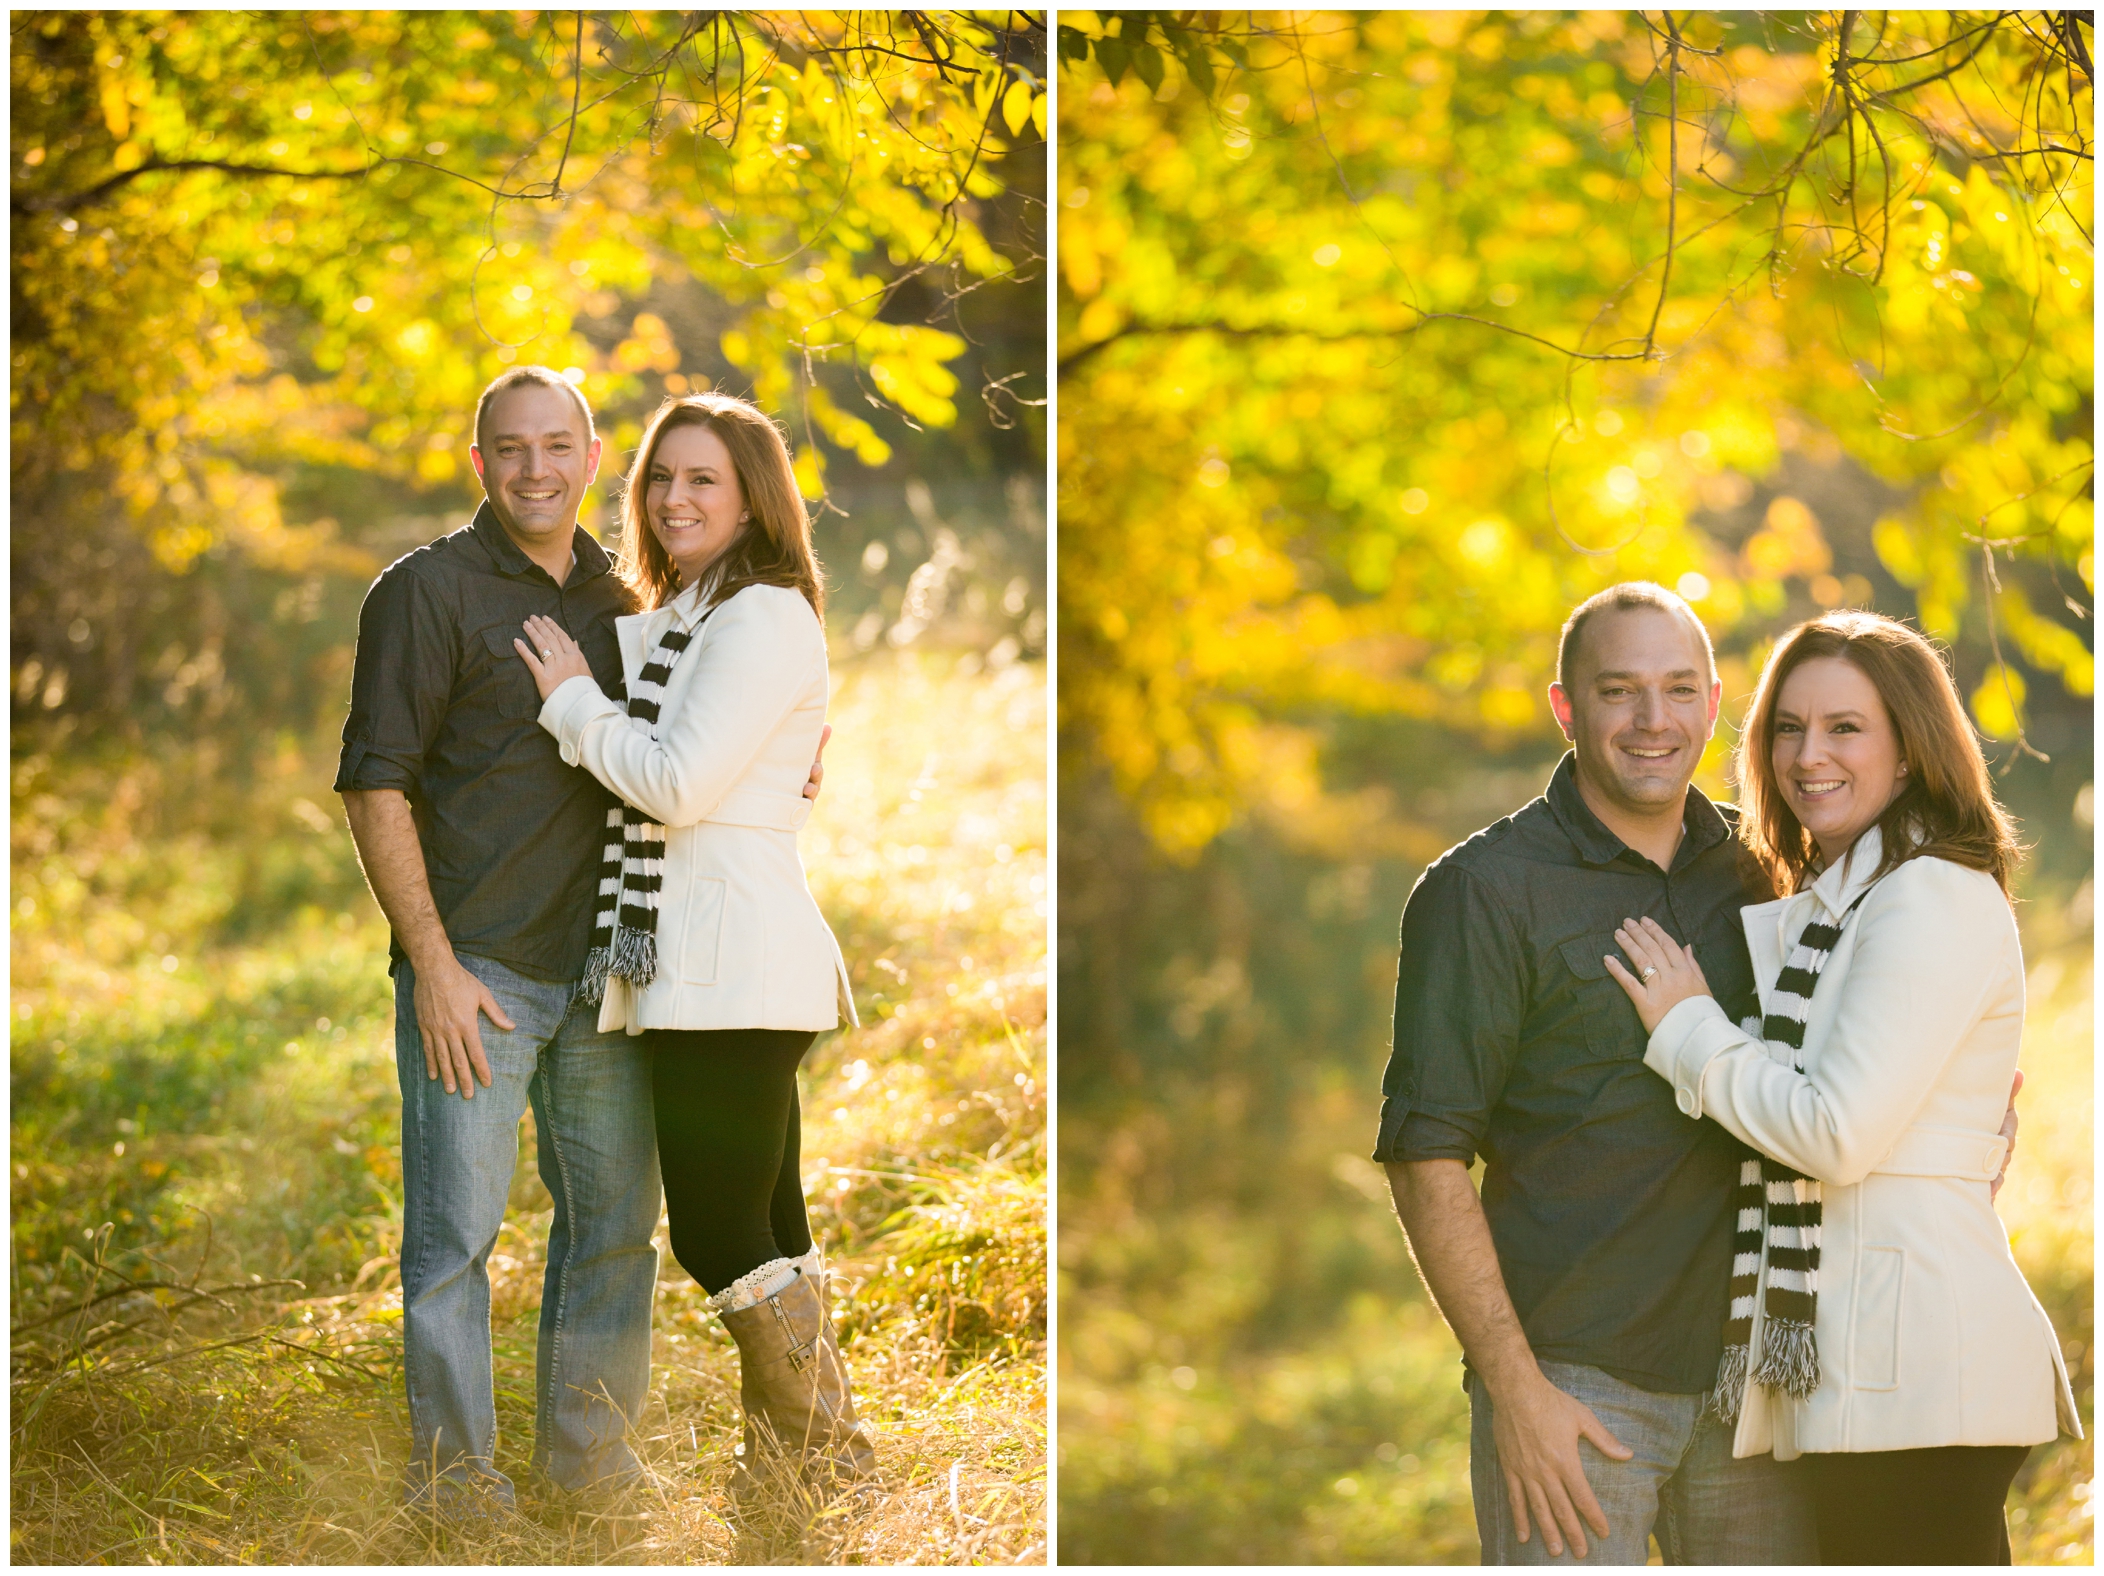 Loveland engagement photos by Plum Pretty Photography